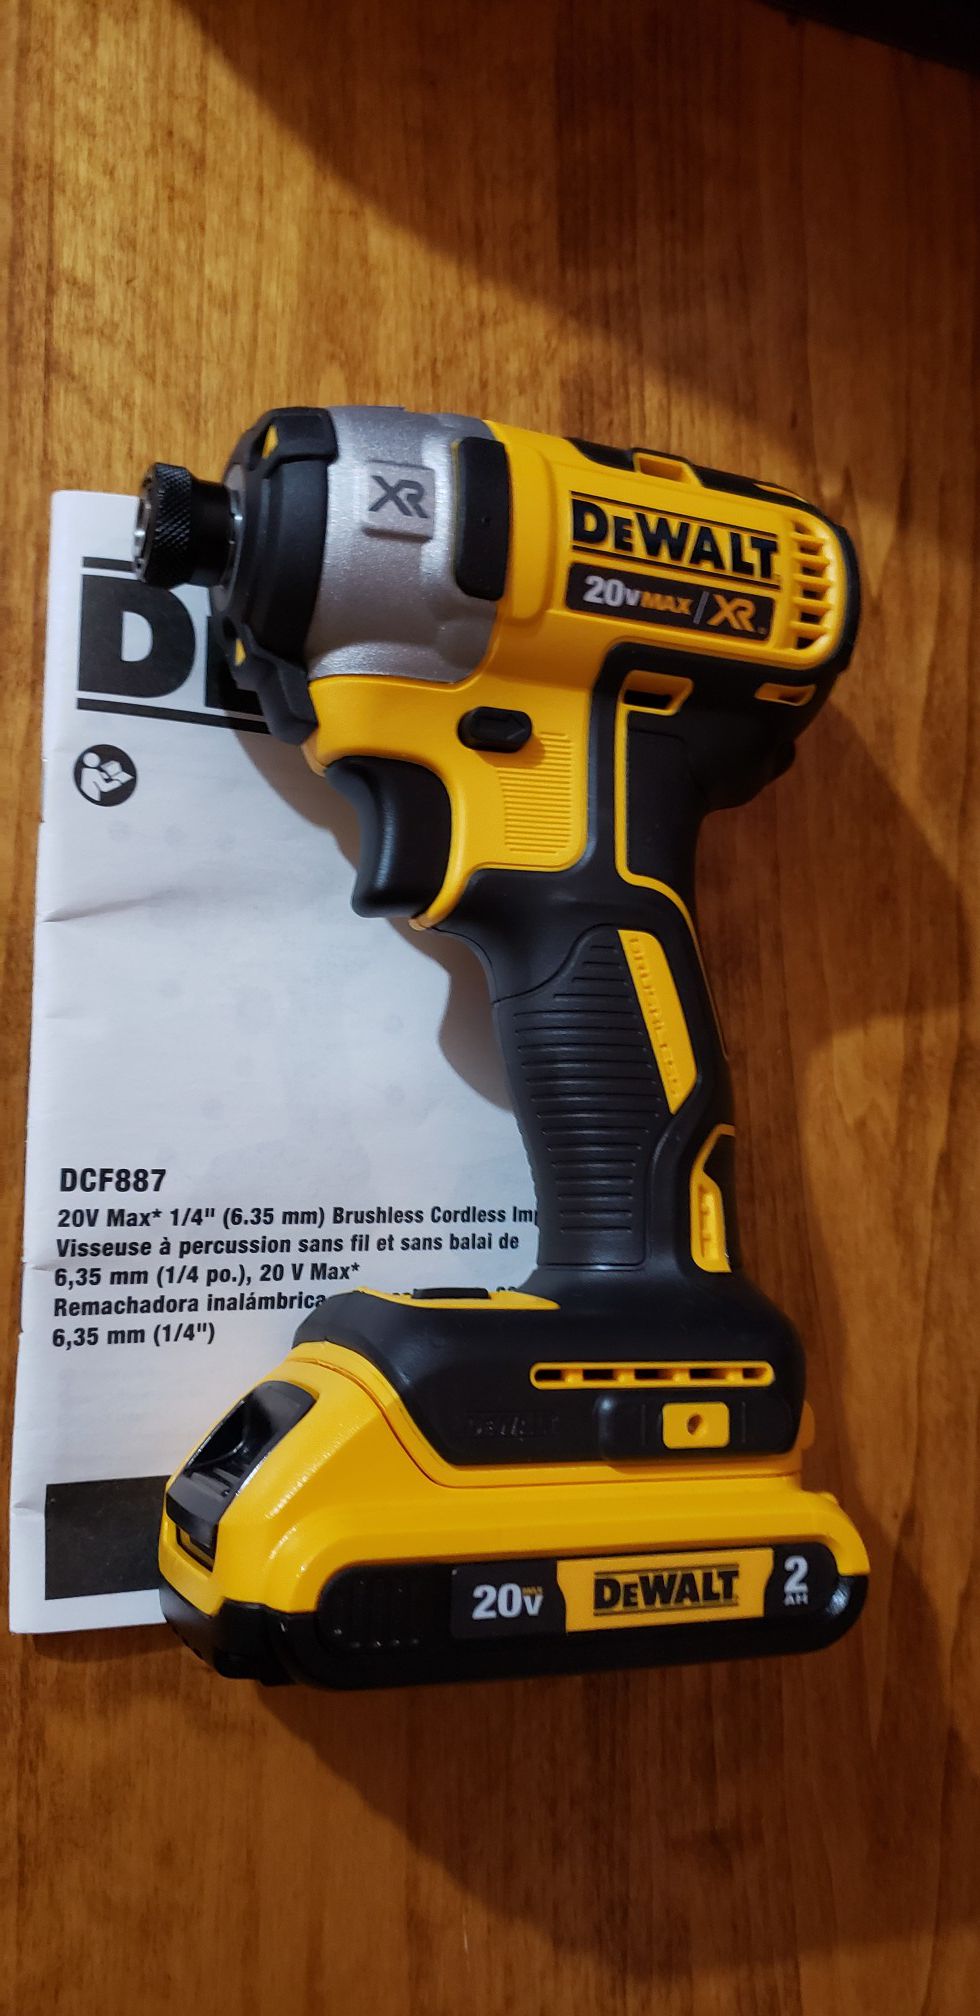 DEWALT 20V IMPACT DRILL 3SPEED XR AND BATTERY.